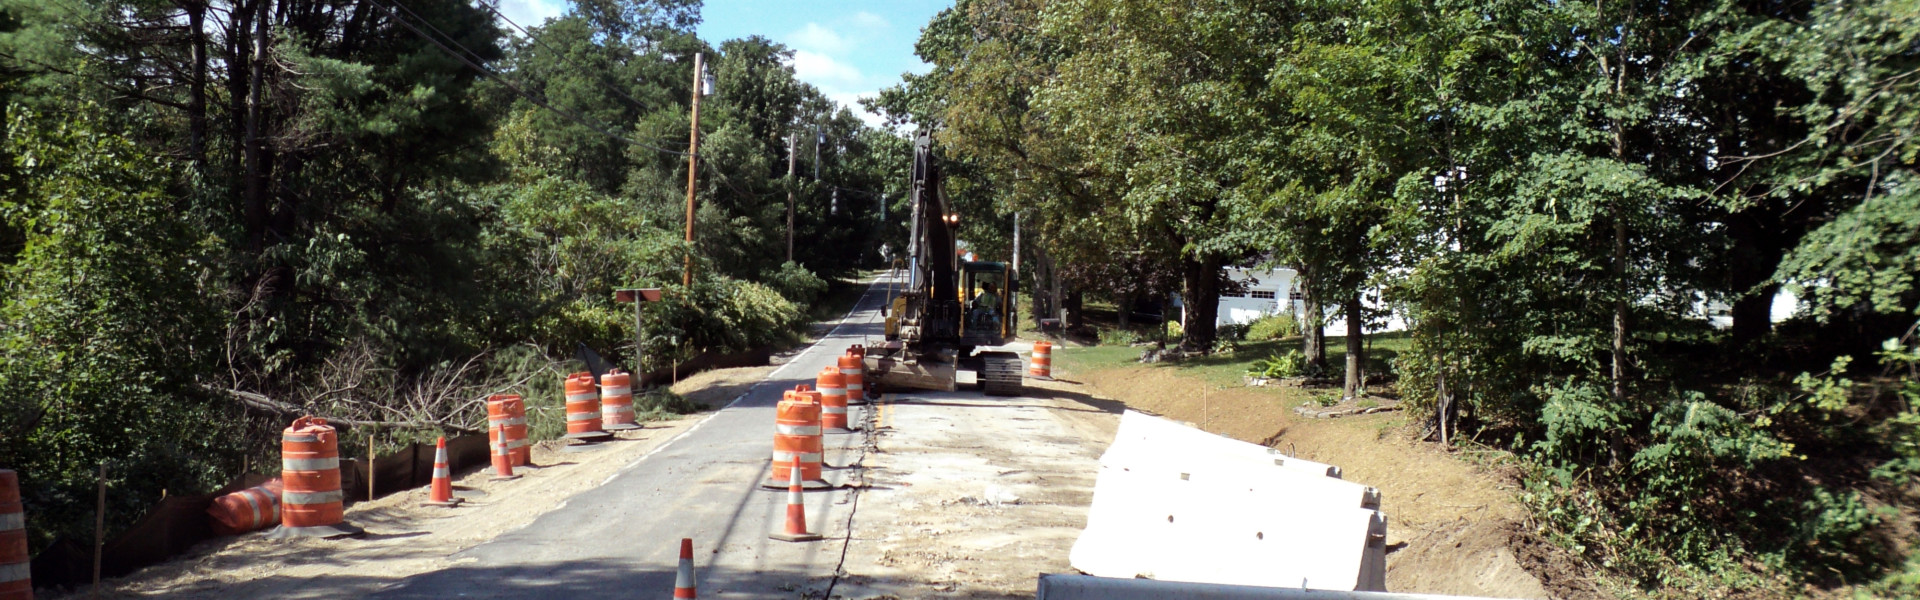 Quiet Road Construction Site with Equipment and Safety Cones